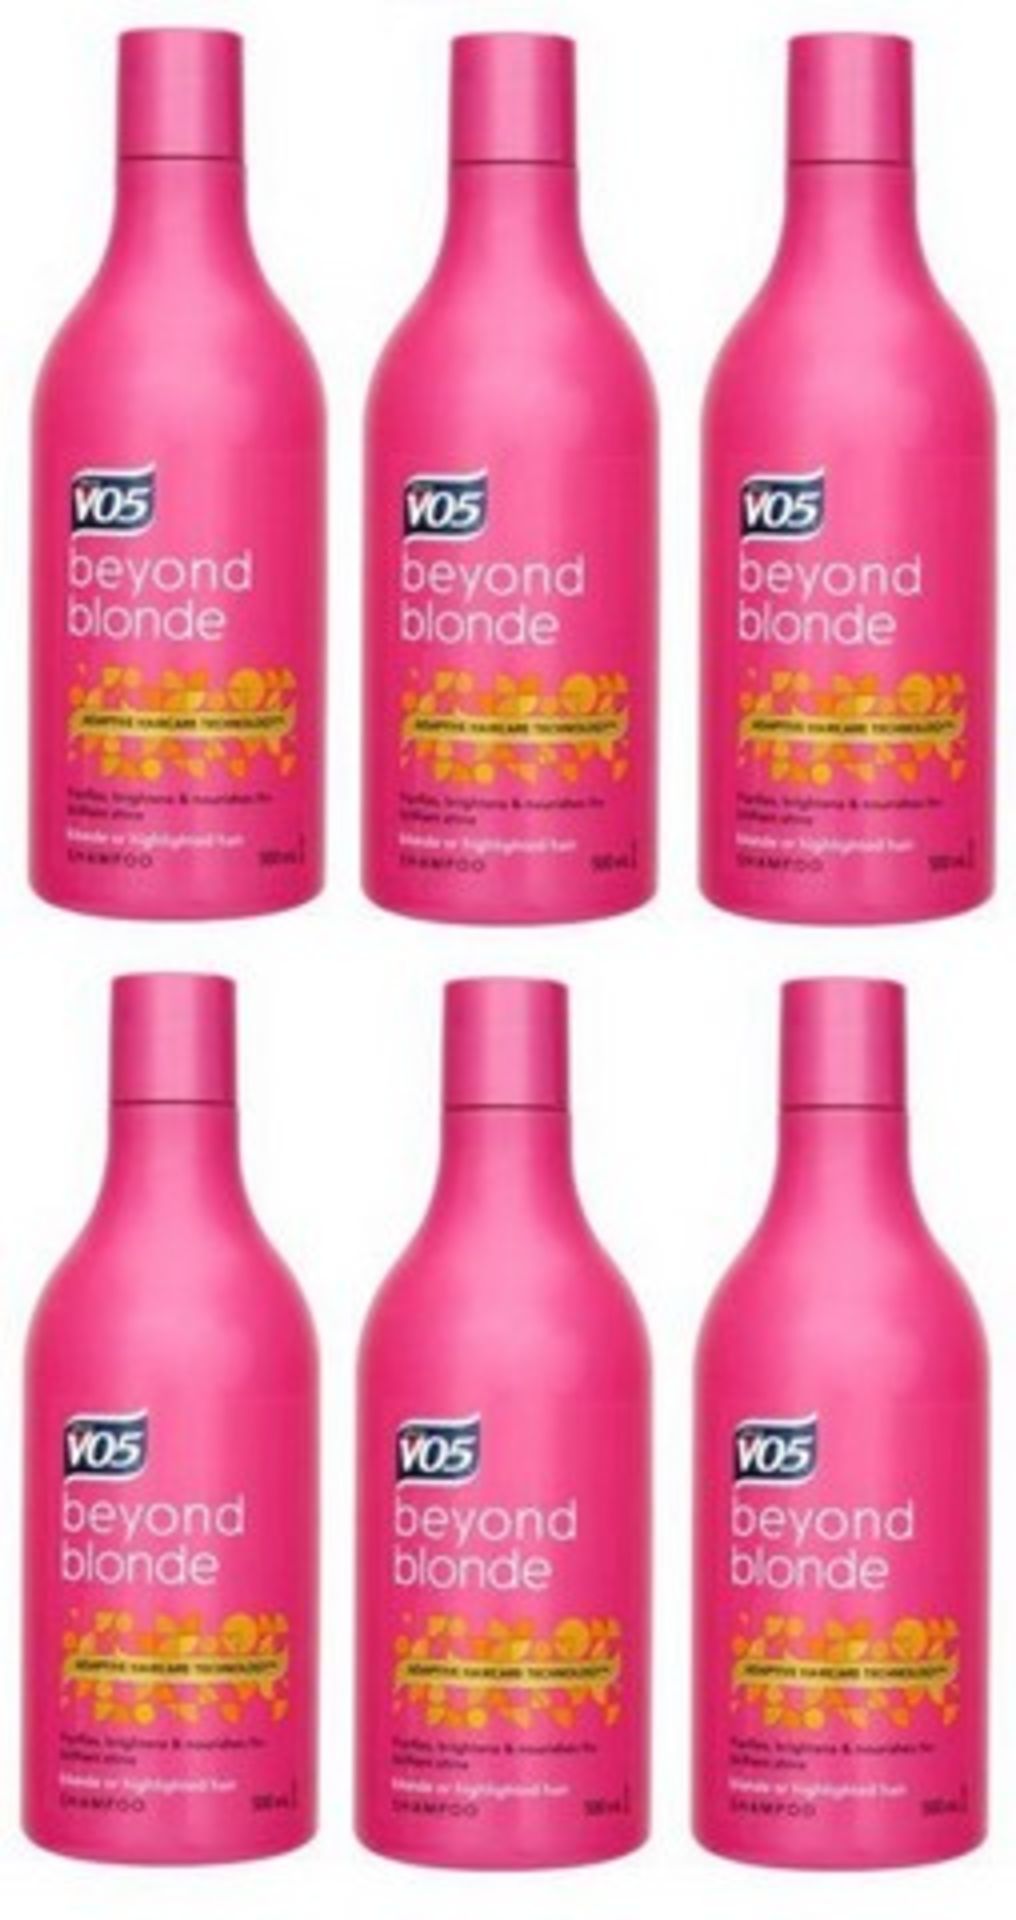 V Brand New A Lot Of 6 VO5 Beyond Blonde Shampoo 500ml - Purifies Brightens & Nourishes For